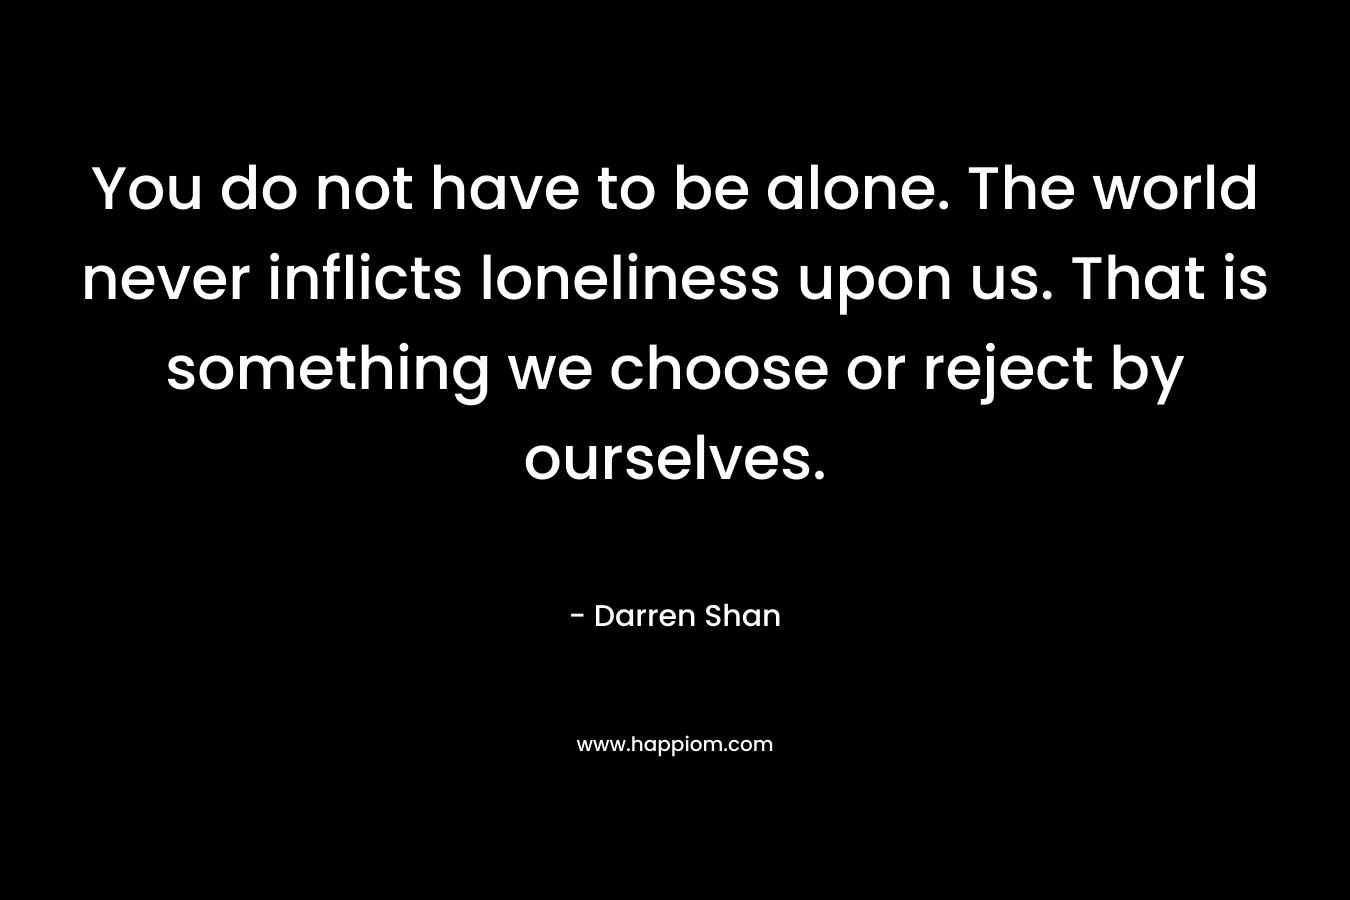 You do not have to be alone. The world never inflicts loneliness upon us. That is something we choose or reject by ourselves. – Darren Shan